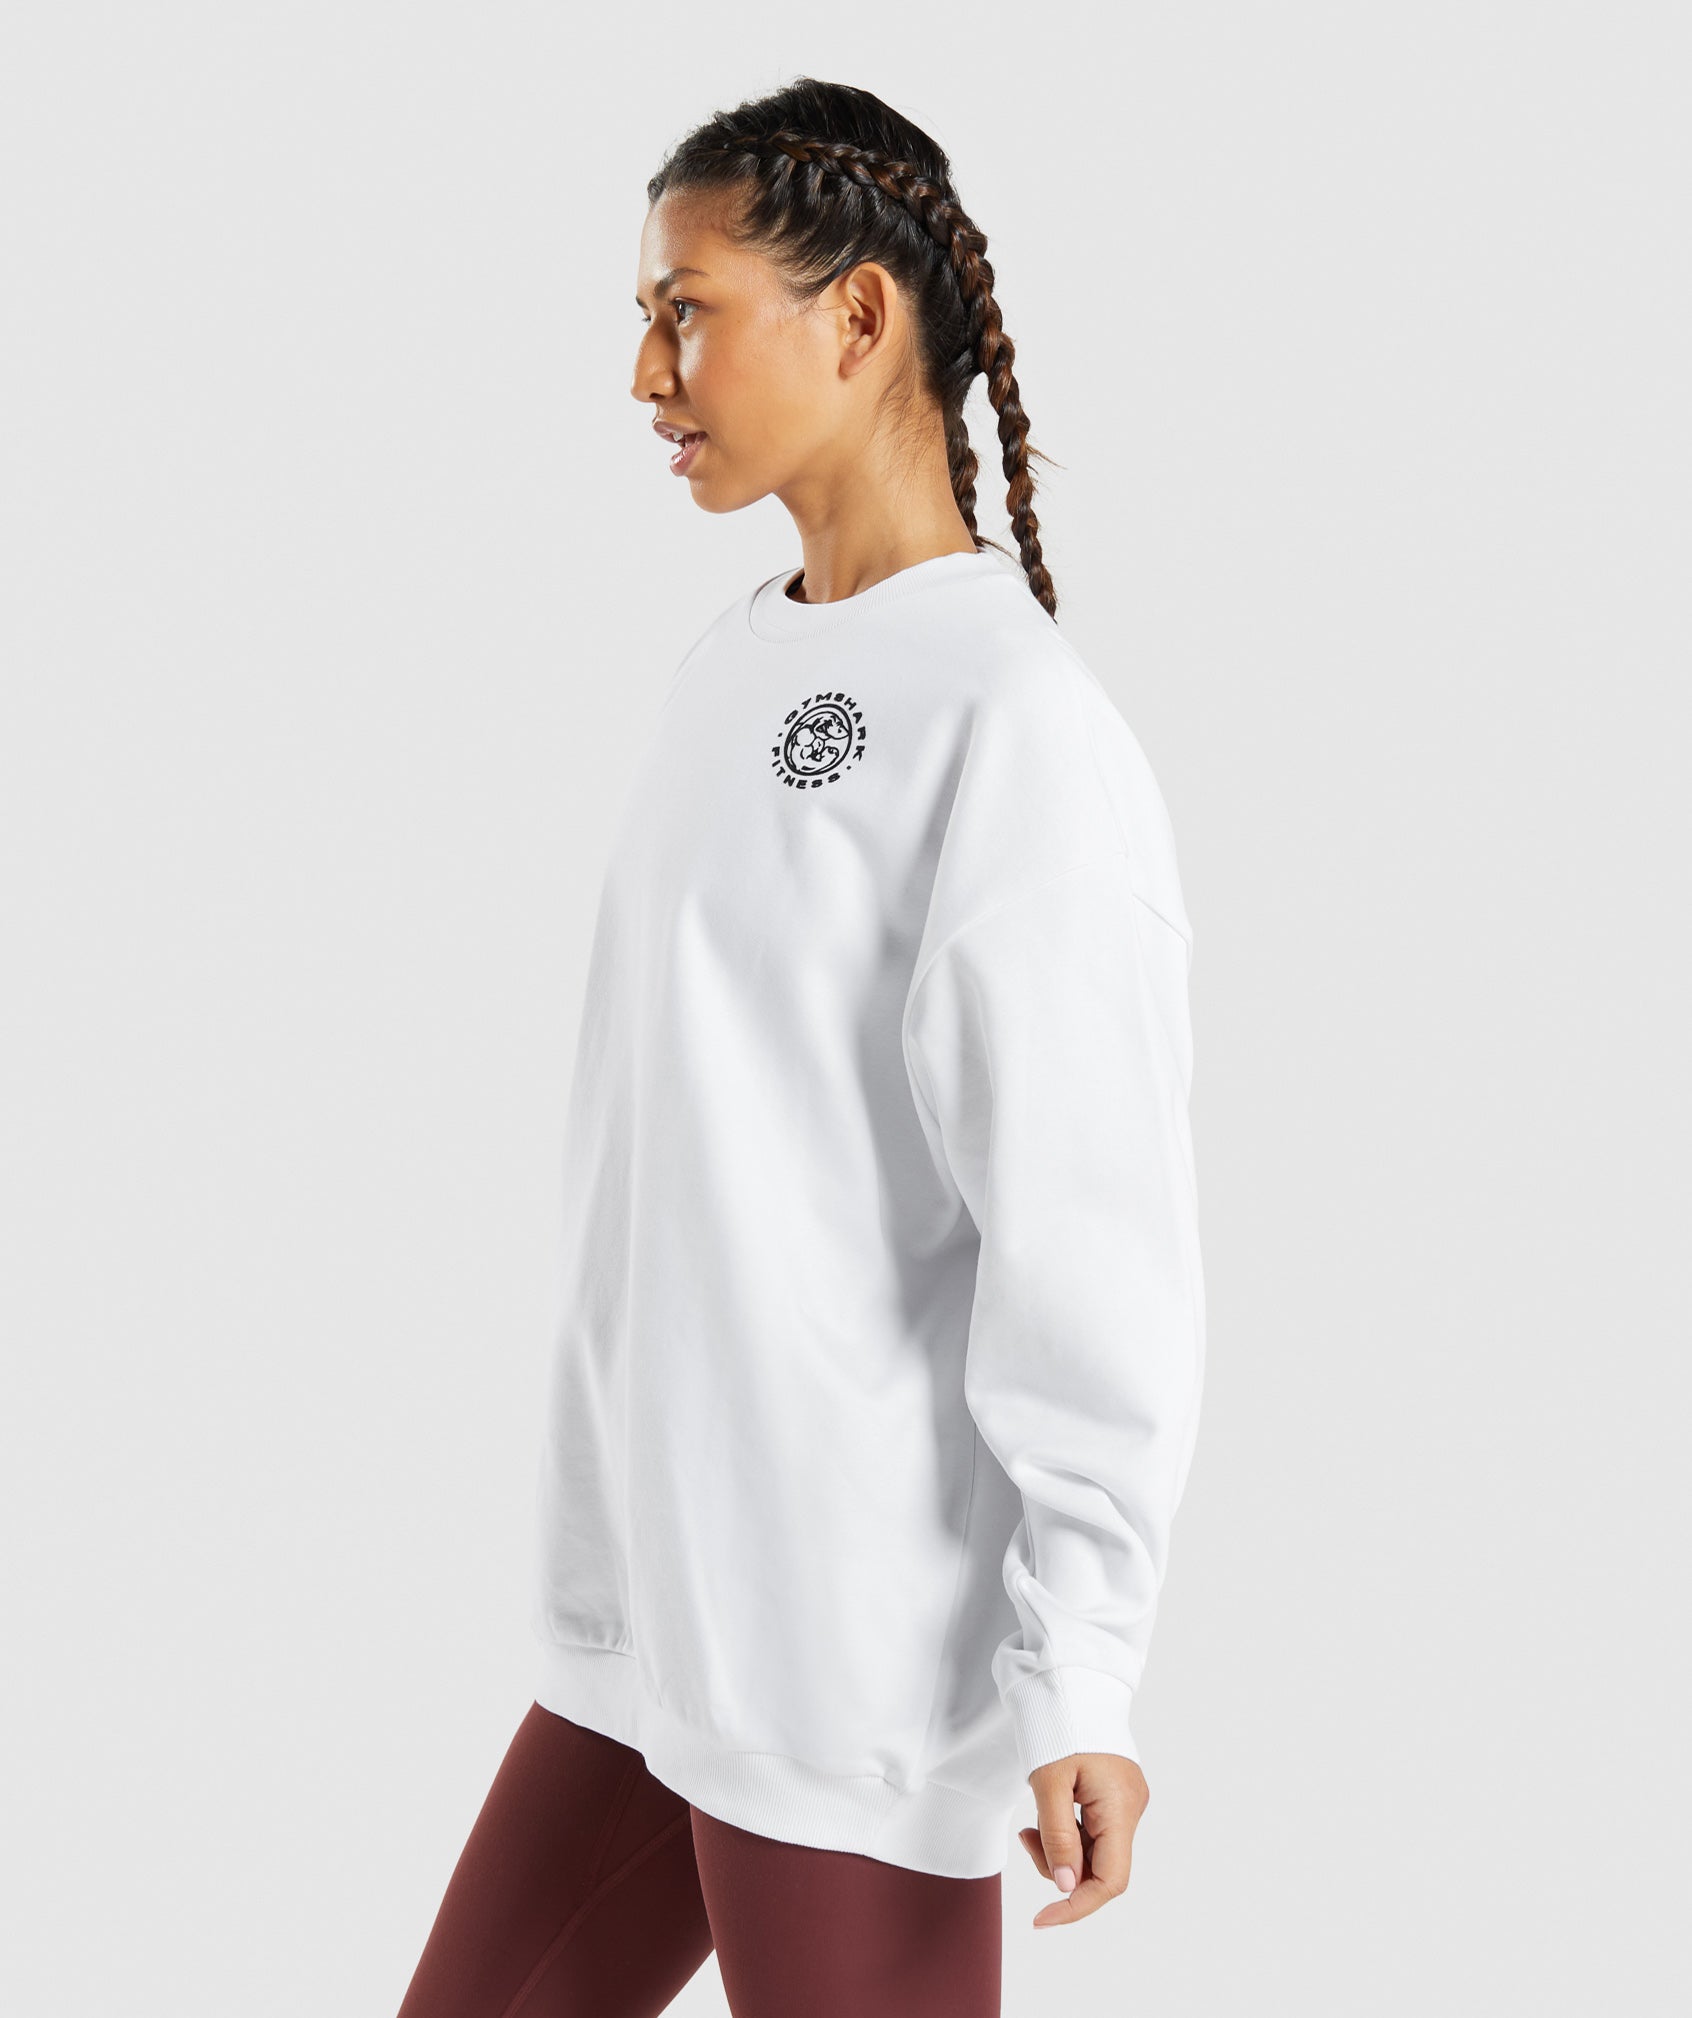 Legacy Graphic Sweatshirt in White - view 4